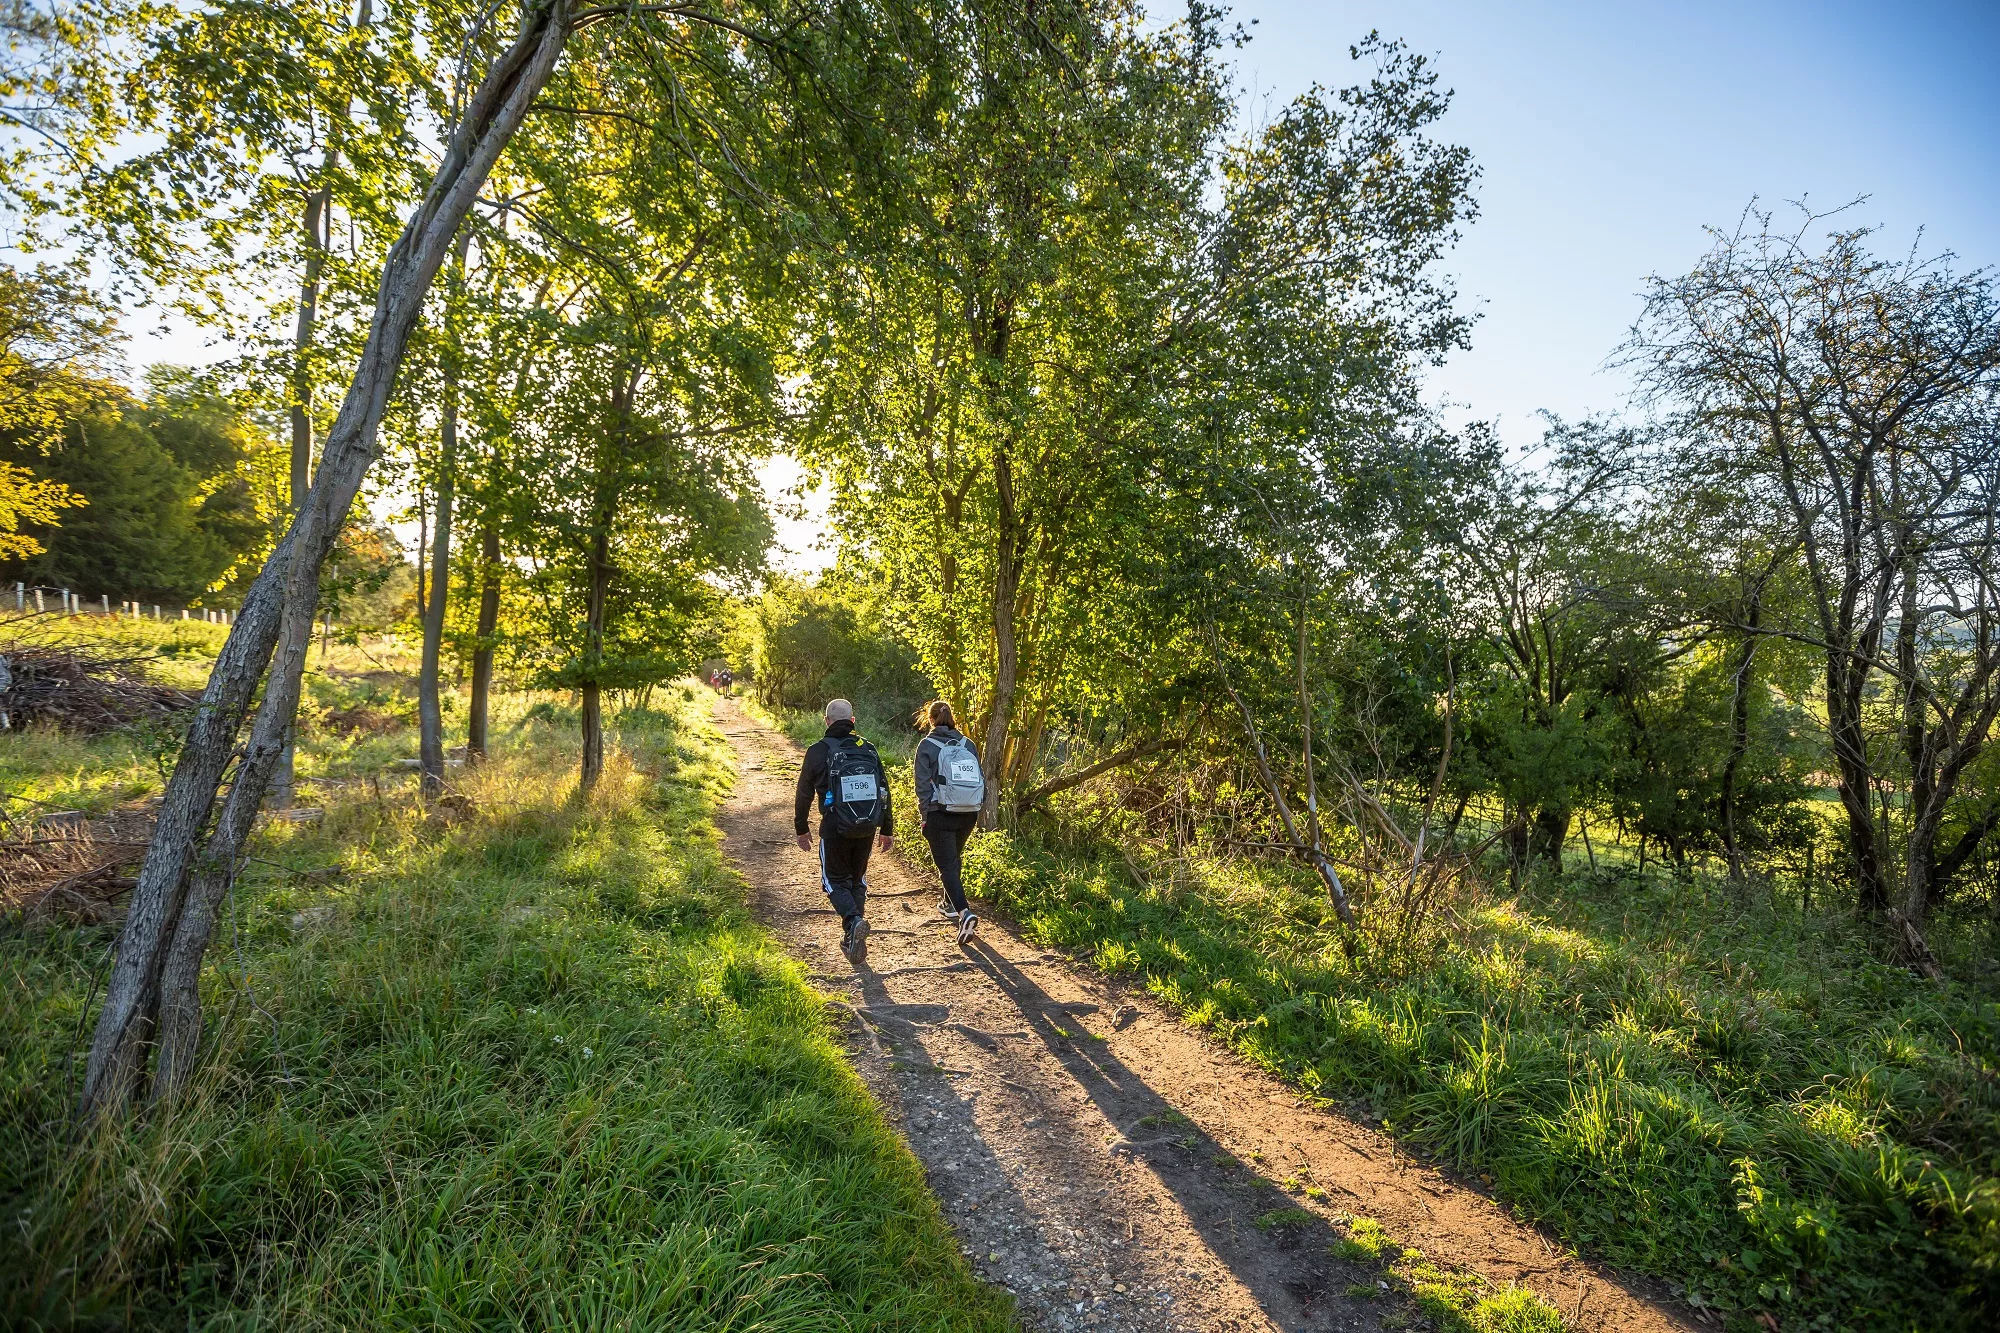 Two people walking surrounded by fields and trees.